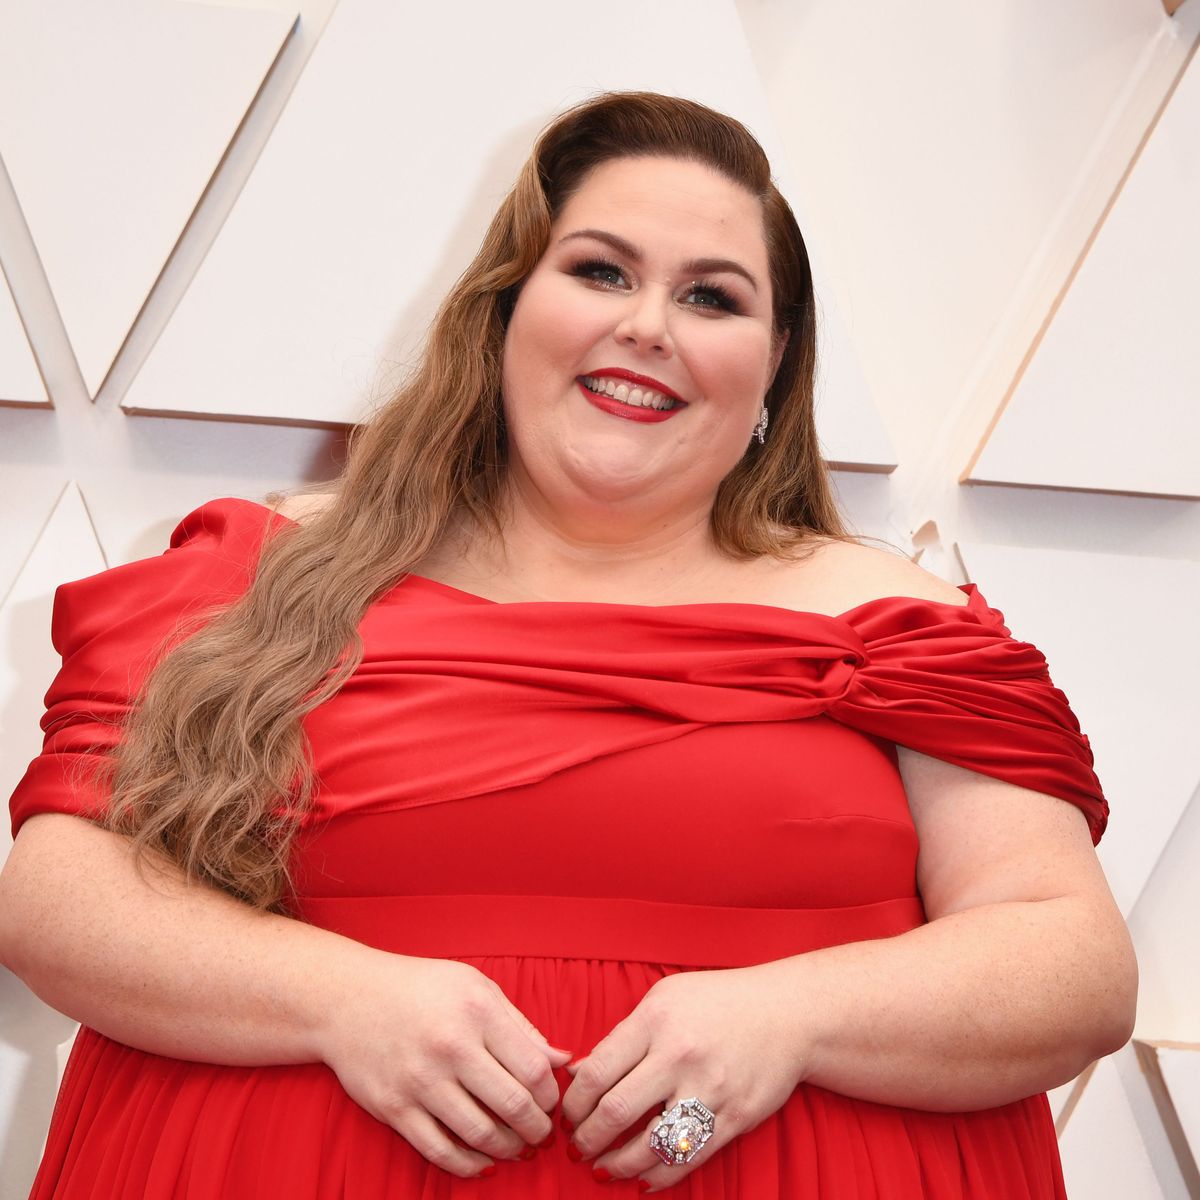 Chrissy Metz's Weight-Loss Journey: Everything She's Revealed